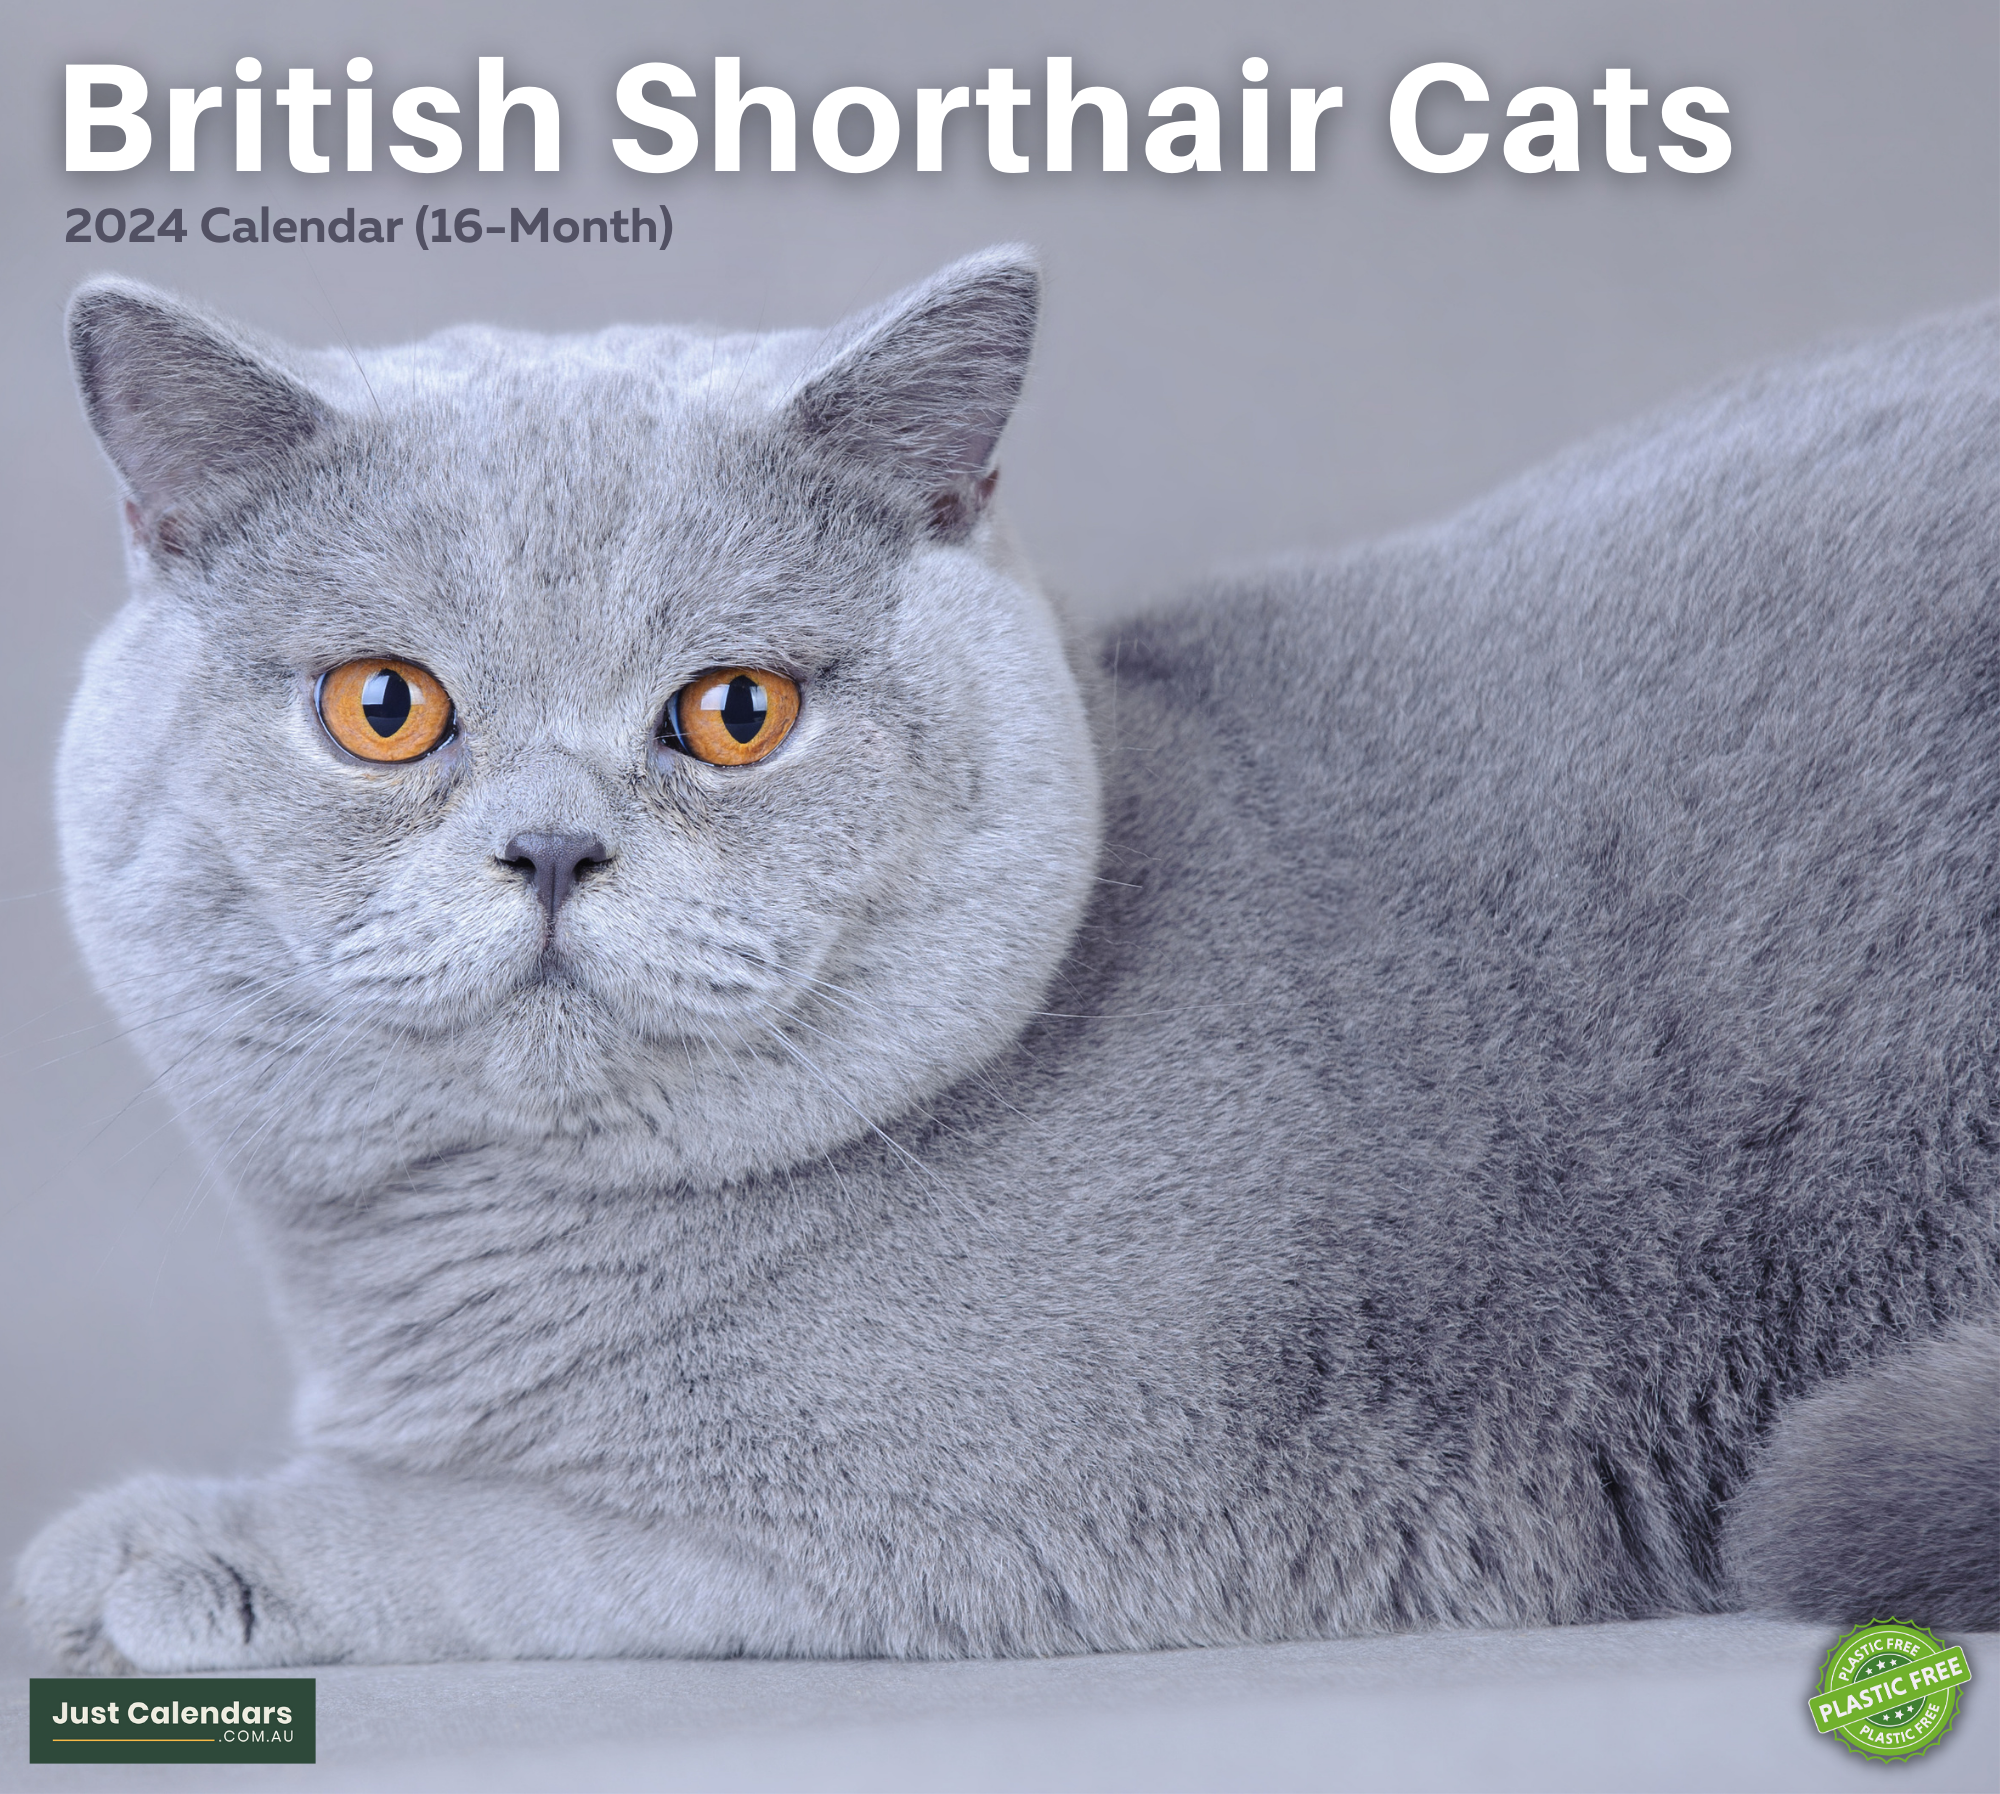 2024 British Shorthair Cats Cats & Kittens - Deluxe Wall Calendar by Just Calendars - 16 Month - Plastic Free